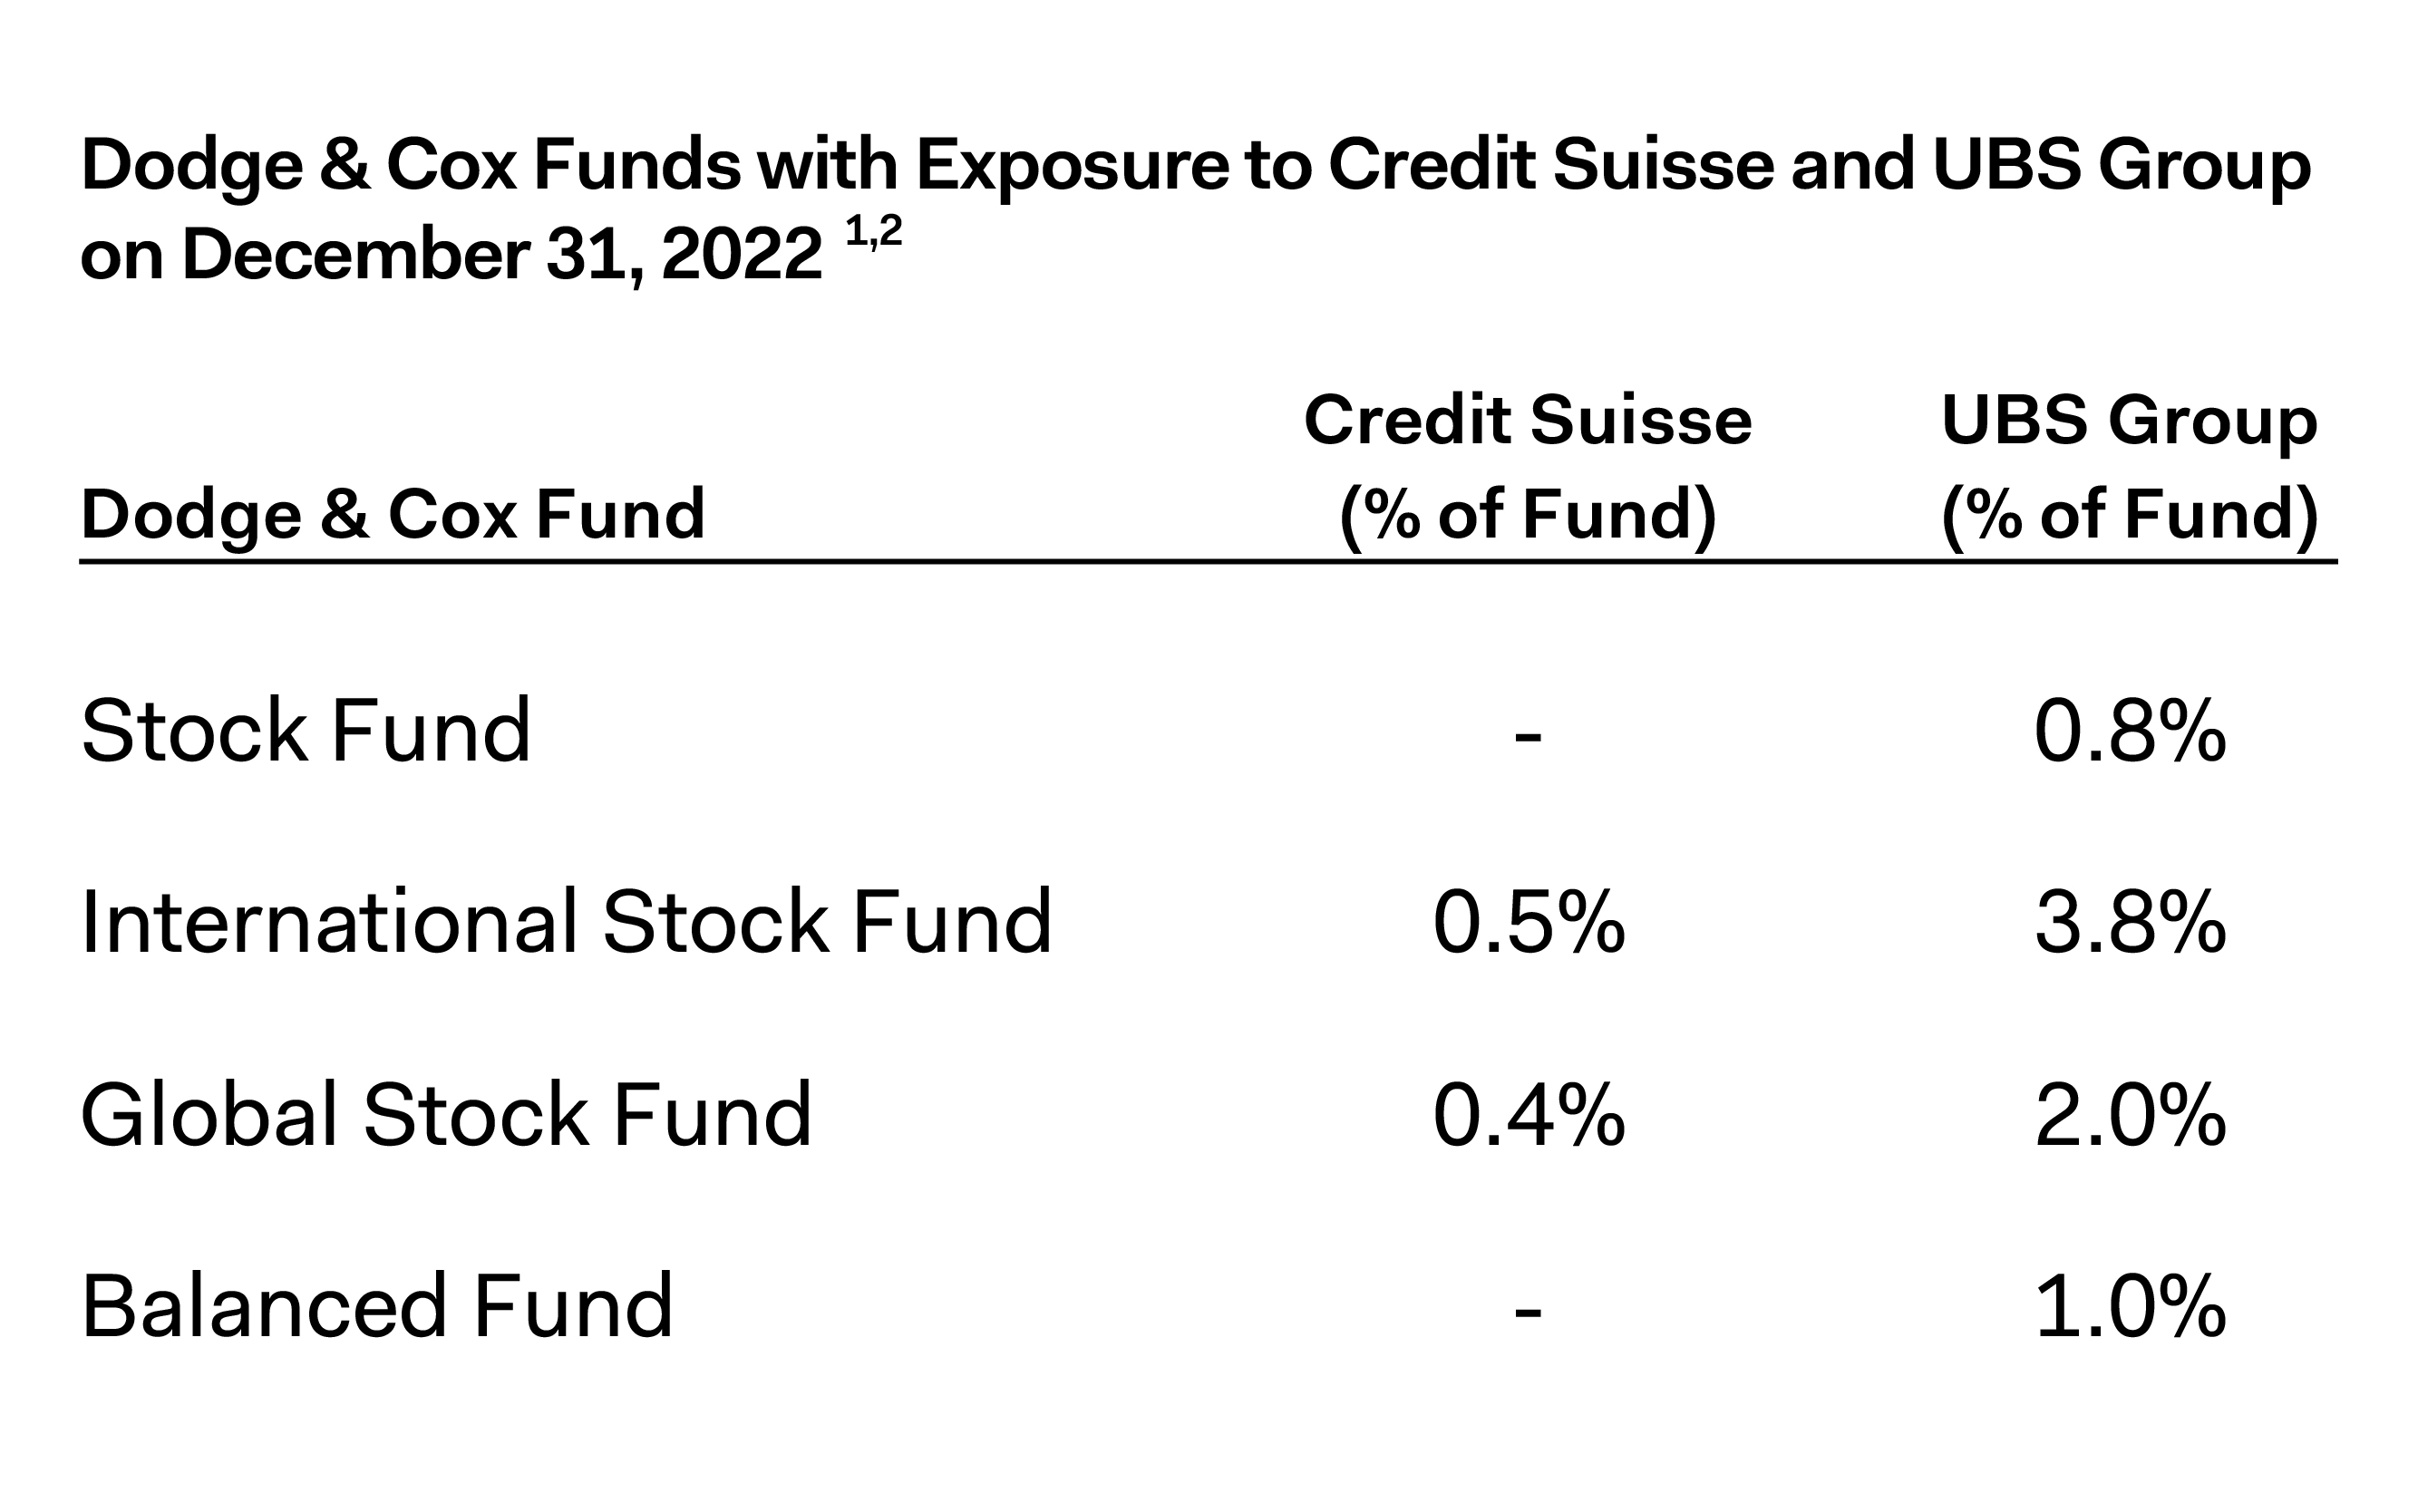 Exposure to Credit Suisse and UBS Group